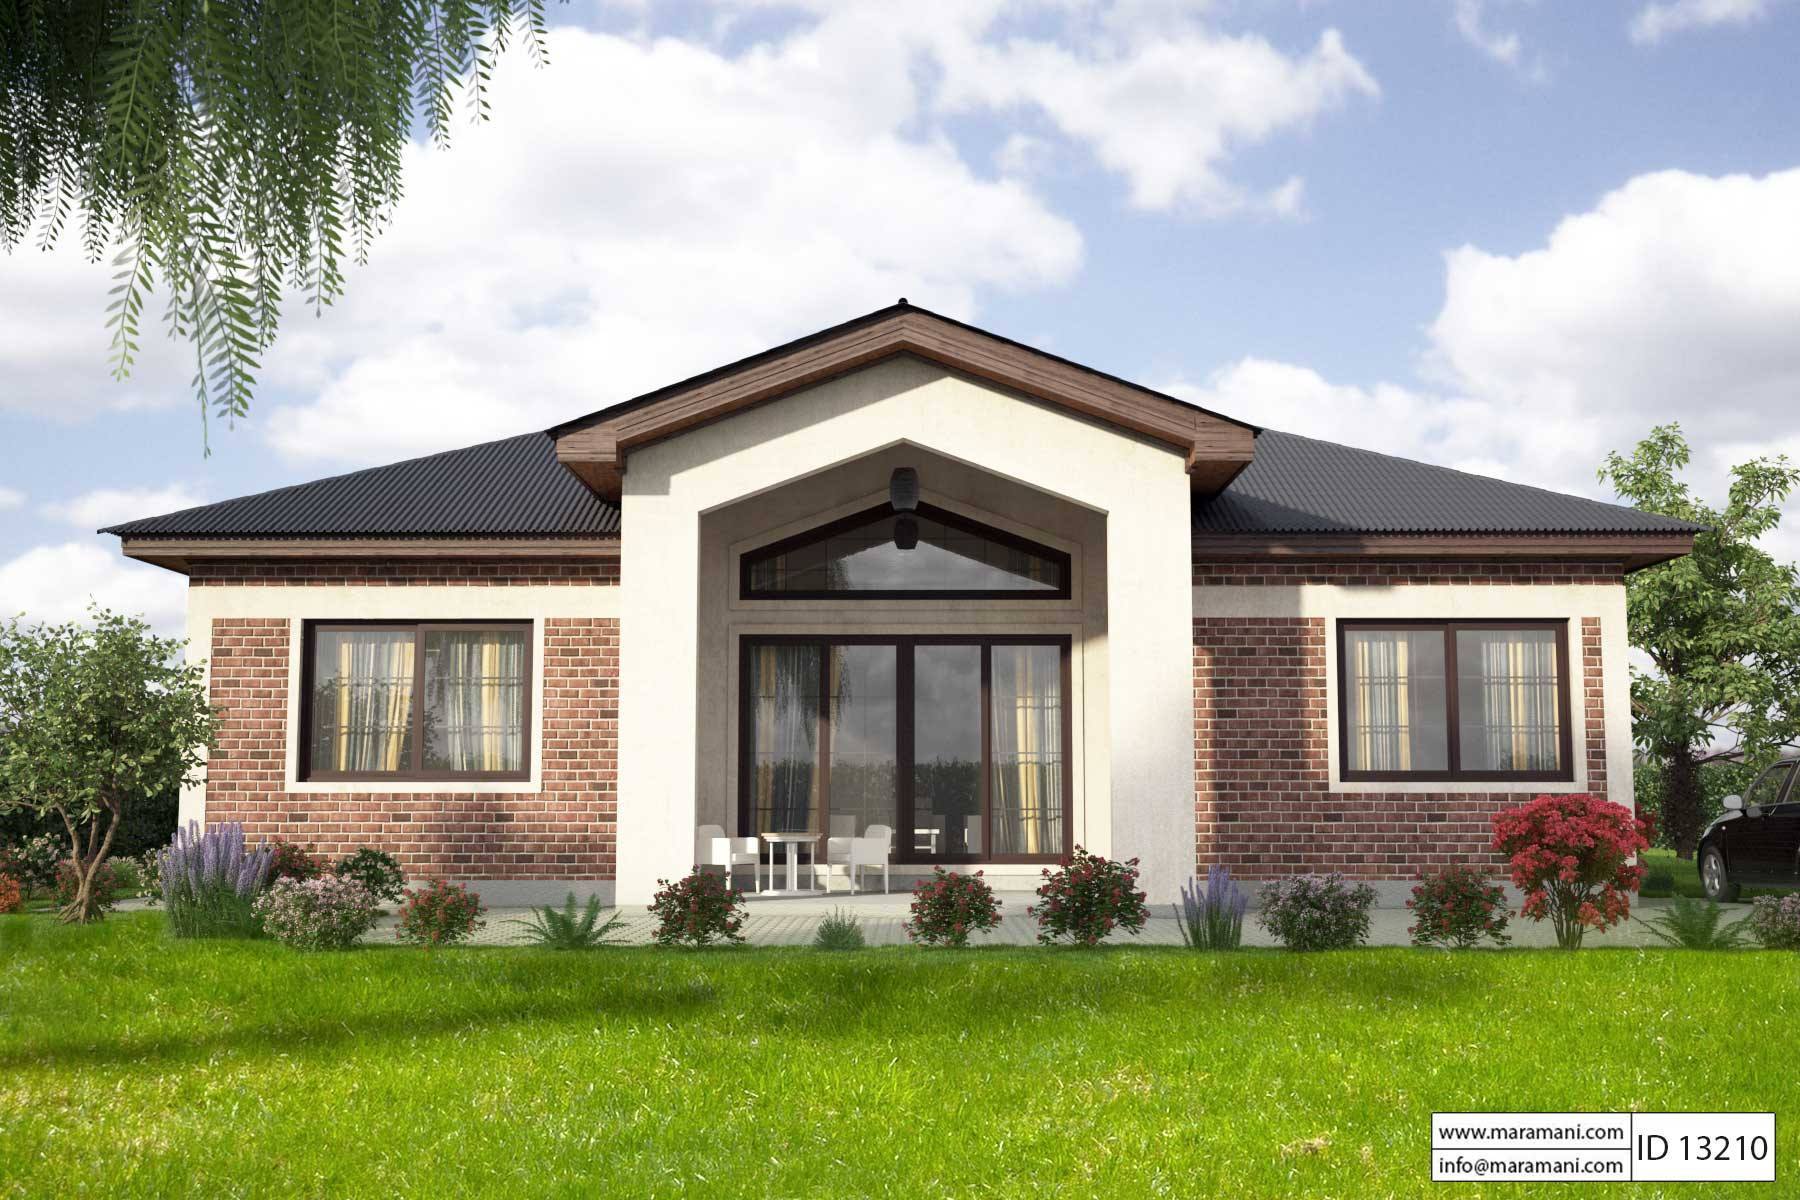 3 Bedroom House Plans & Designs for Africa - House Plans by Maramani